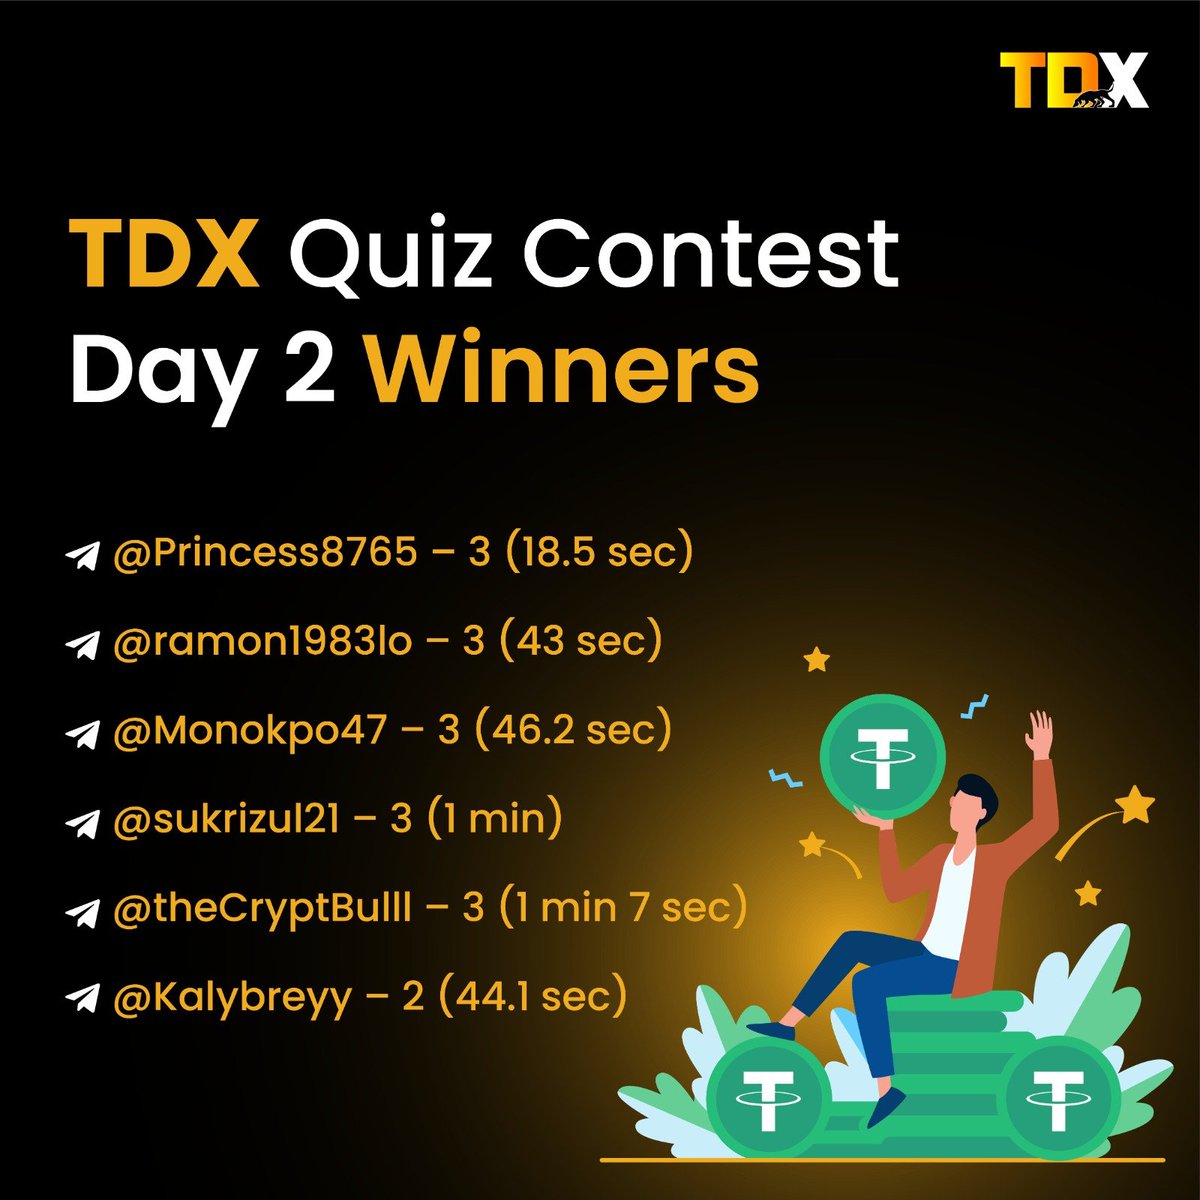 🏆 Congratulations to the Day 2 TDX Quiz Contest winners on Telegram! 🥳 🥇 Princess8765 🥈 ramon1983lo 🥉 Monokpo47 4 sukrizul21 5 theCryptBulll 6 Kalybreyy You all rocked it with your quick thinking and knowledge! 🚀 Keep up the amazing work! #TDXQuiz #Day2Winners